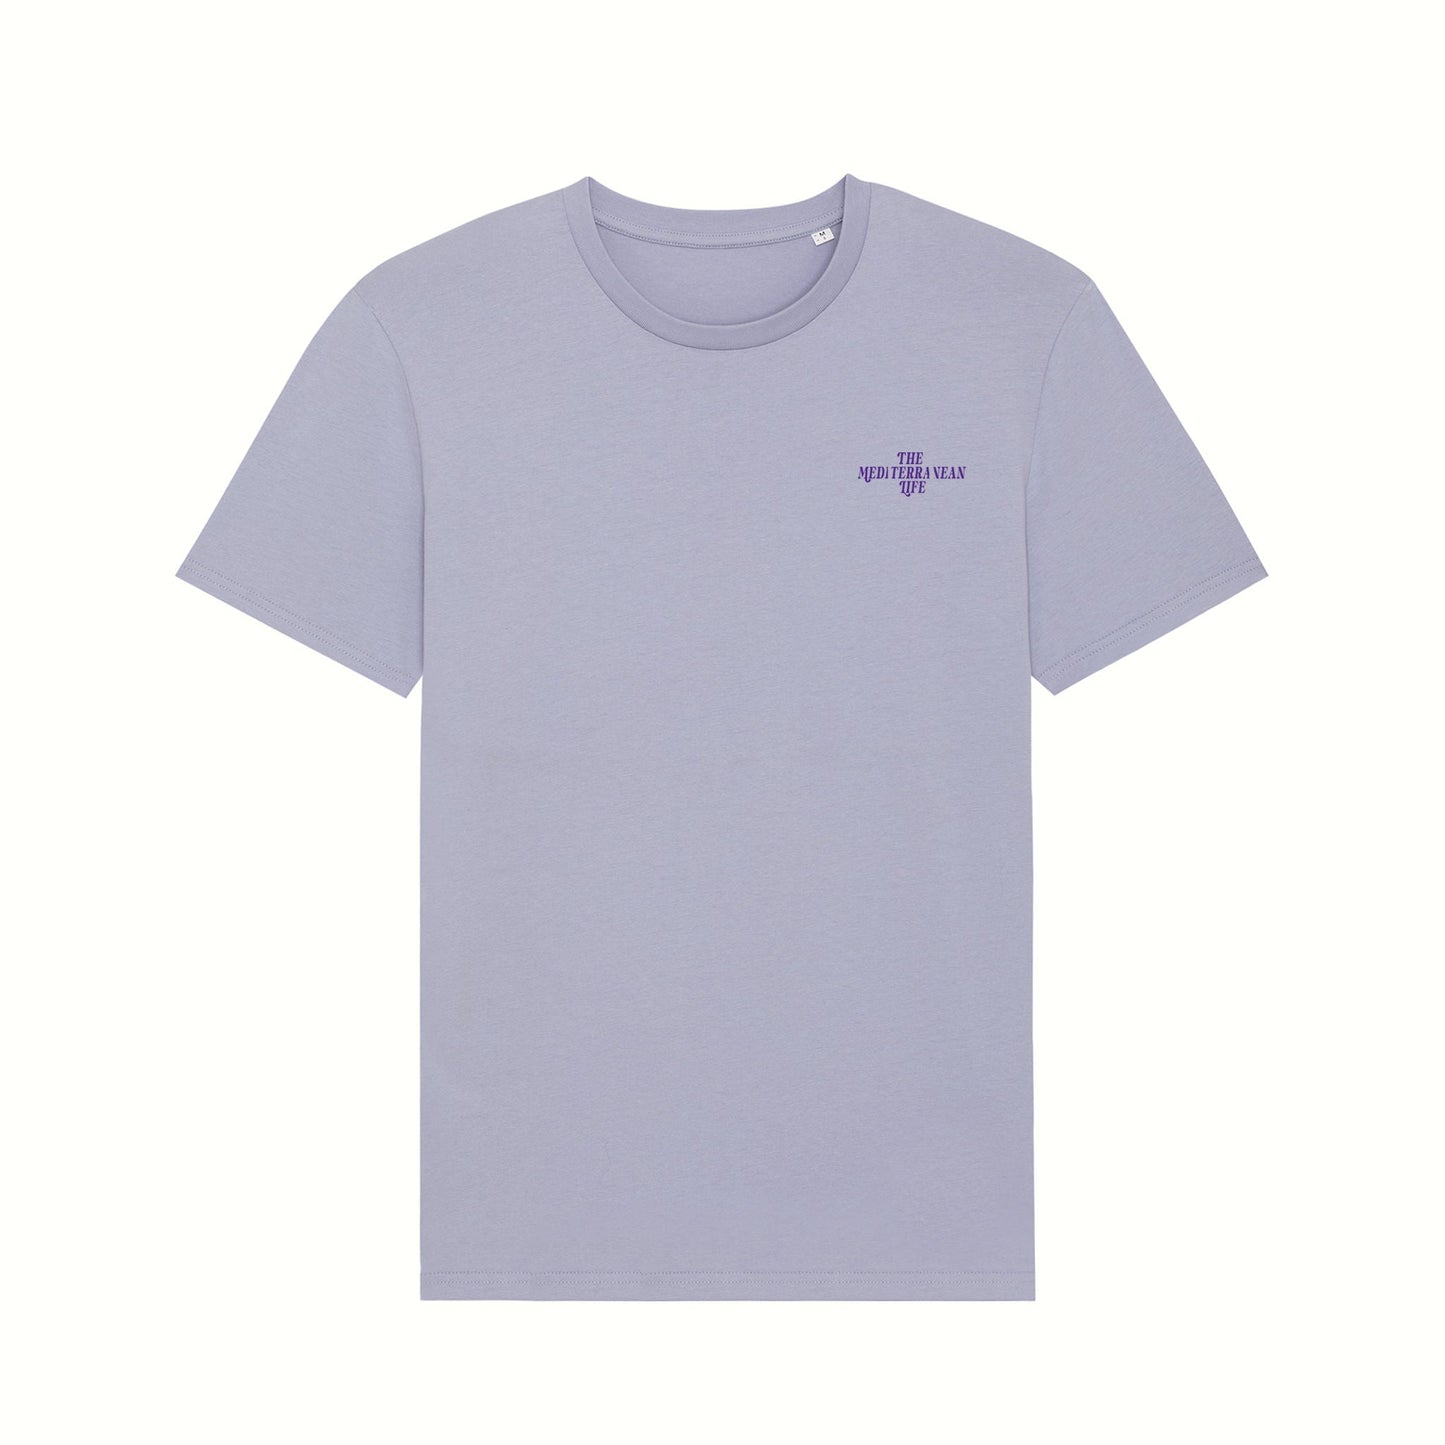 Fear The Ordinary lavender premium organic cotton t-shirt with purple adventure inspired front print.